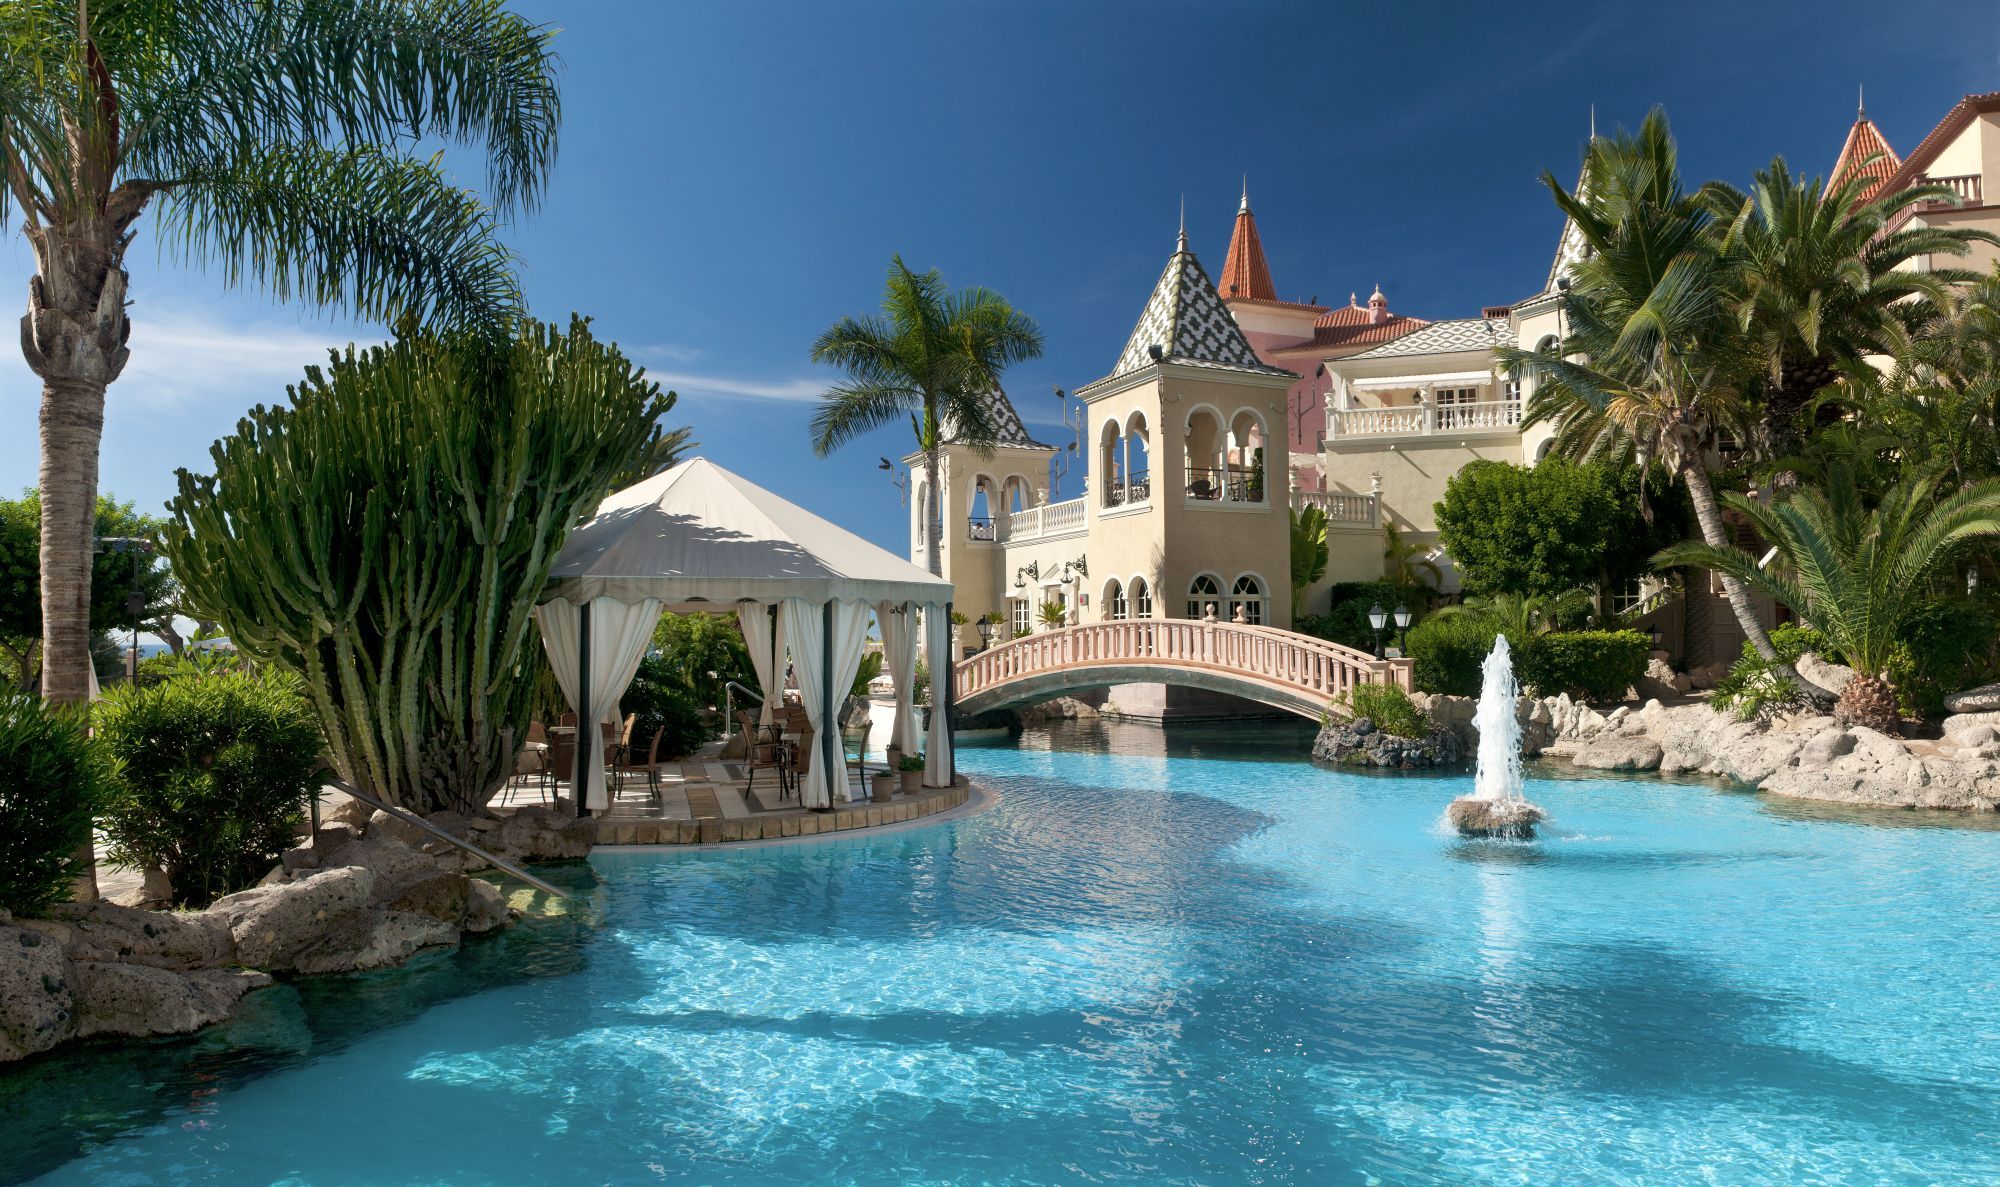 swimming pool at Gran Hotel Bahia Del Duque in the Canaries, Spain 